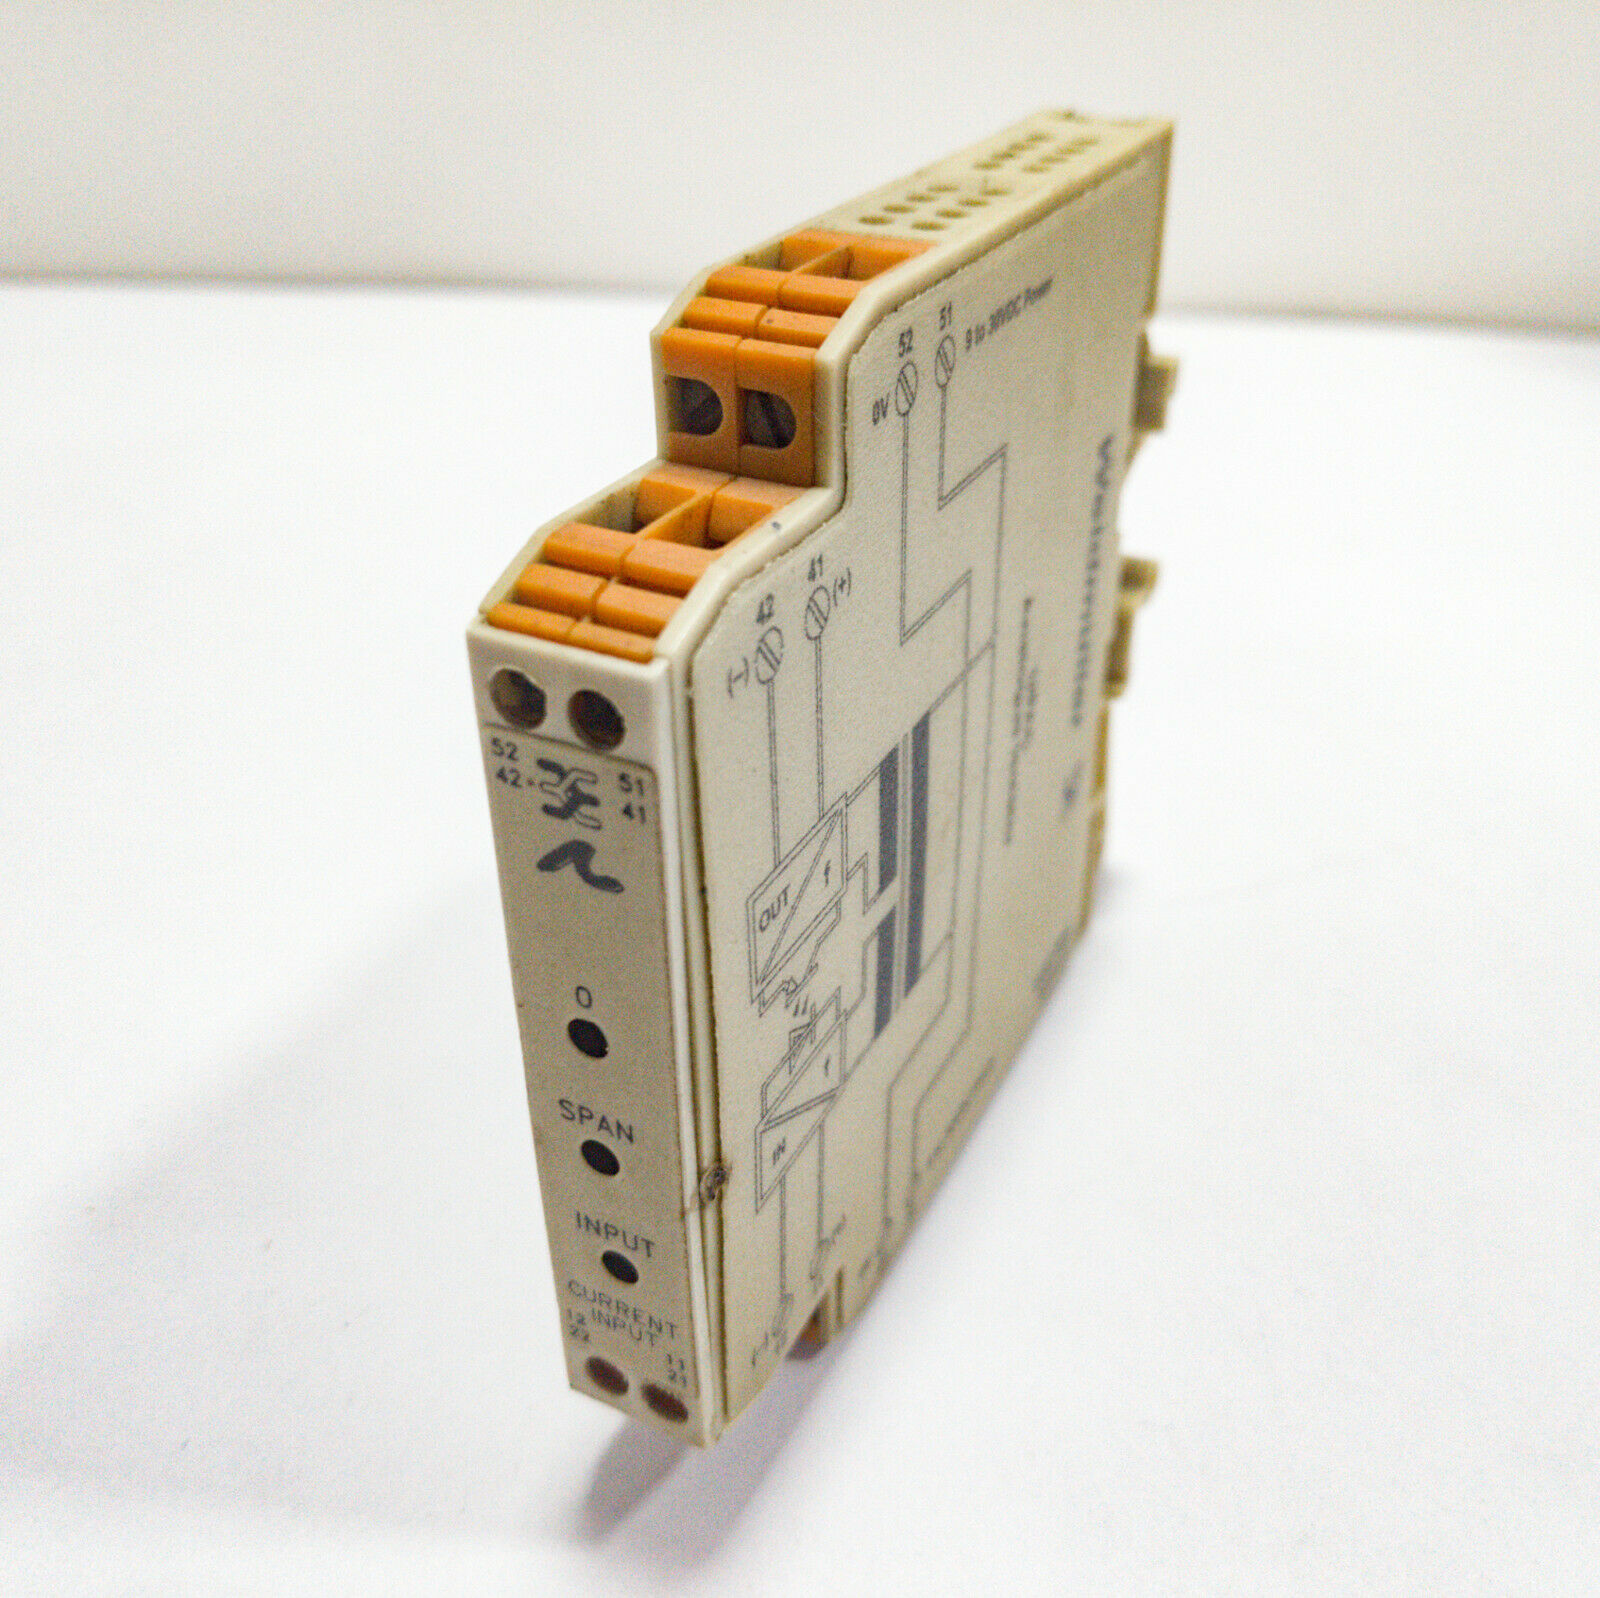 WEIDMULLER W408-00A3 SLIMPAK ANALOGUE ISOLATER RELAY